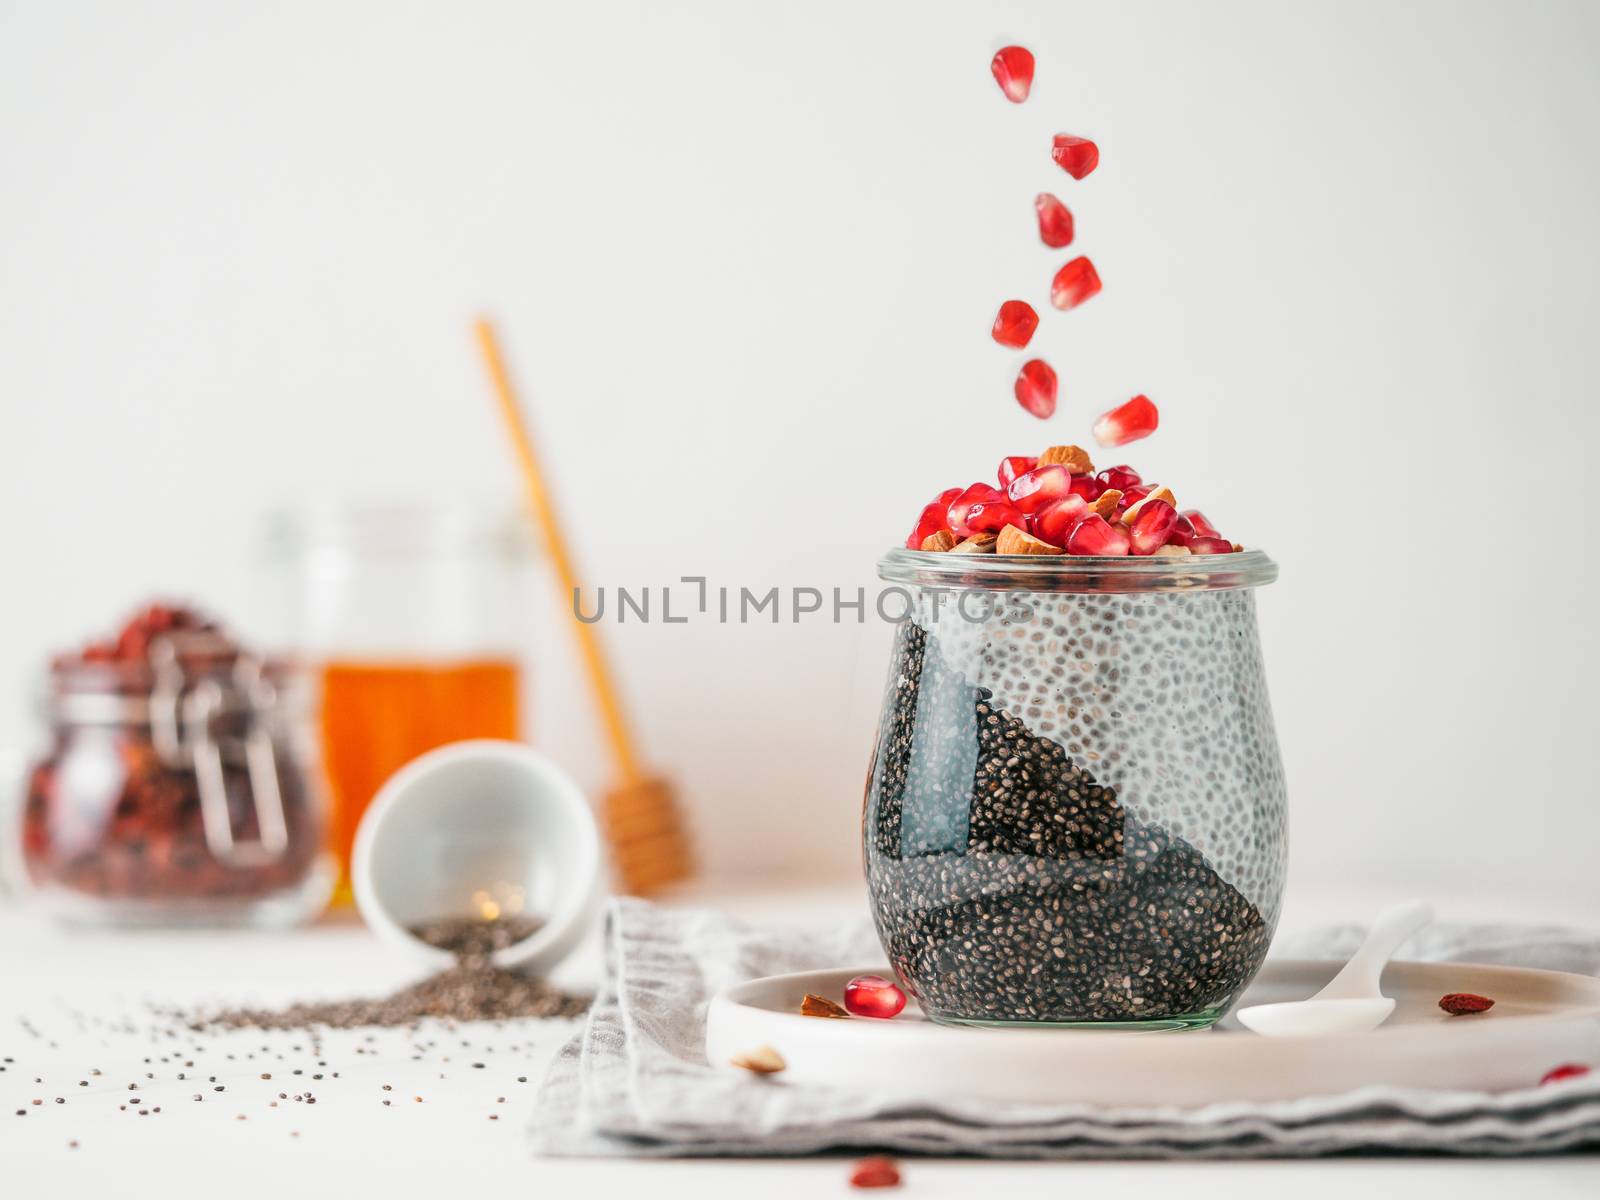 two colors chia pudding, pomegranate, copy space by fascinadora